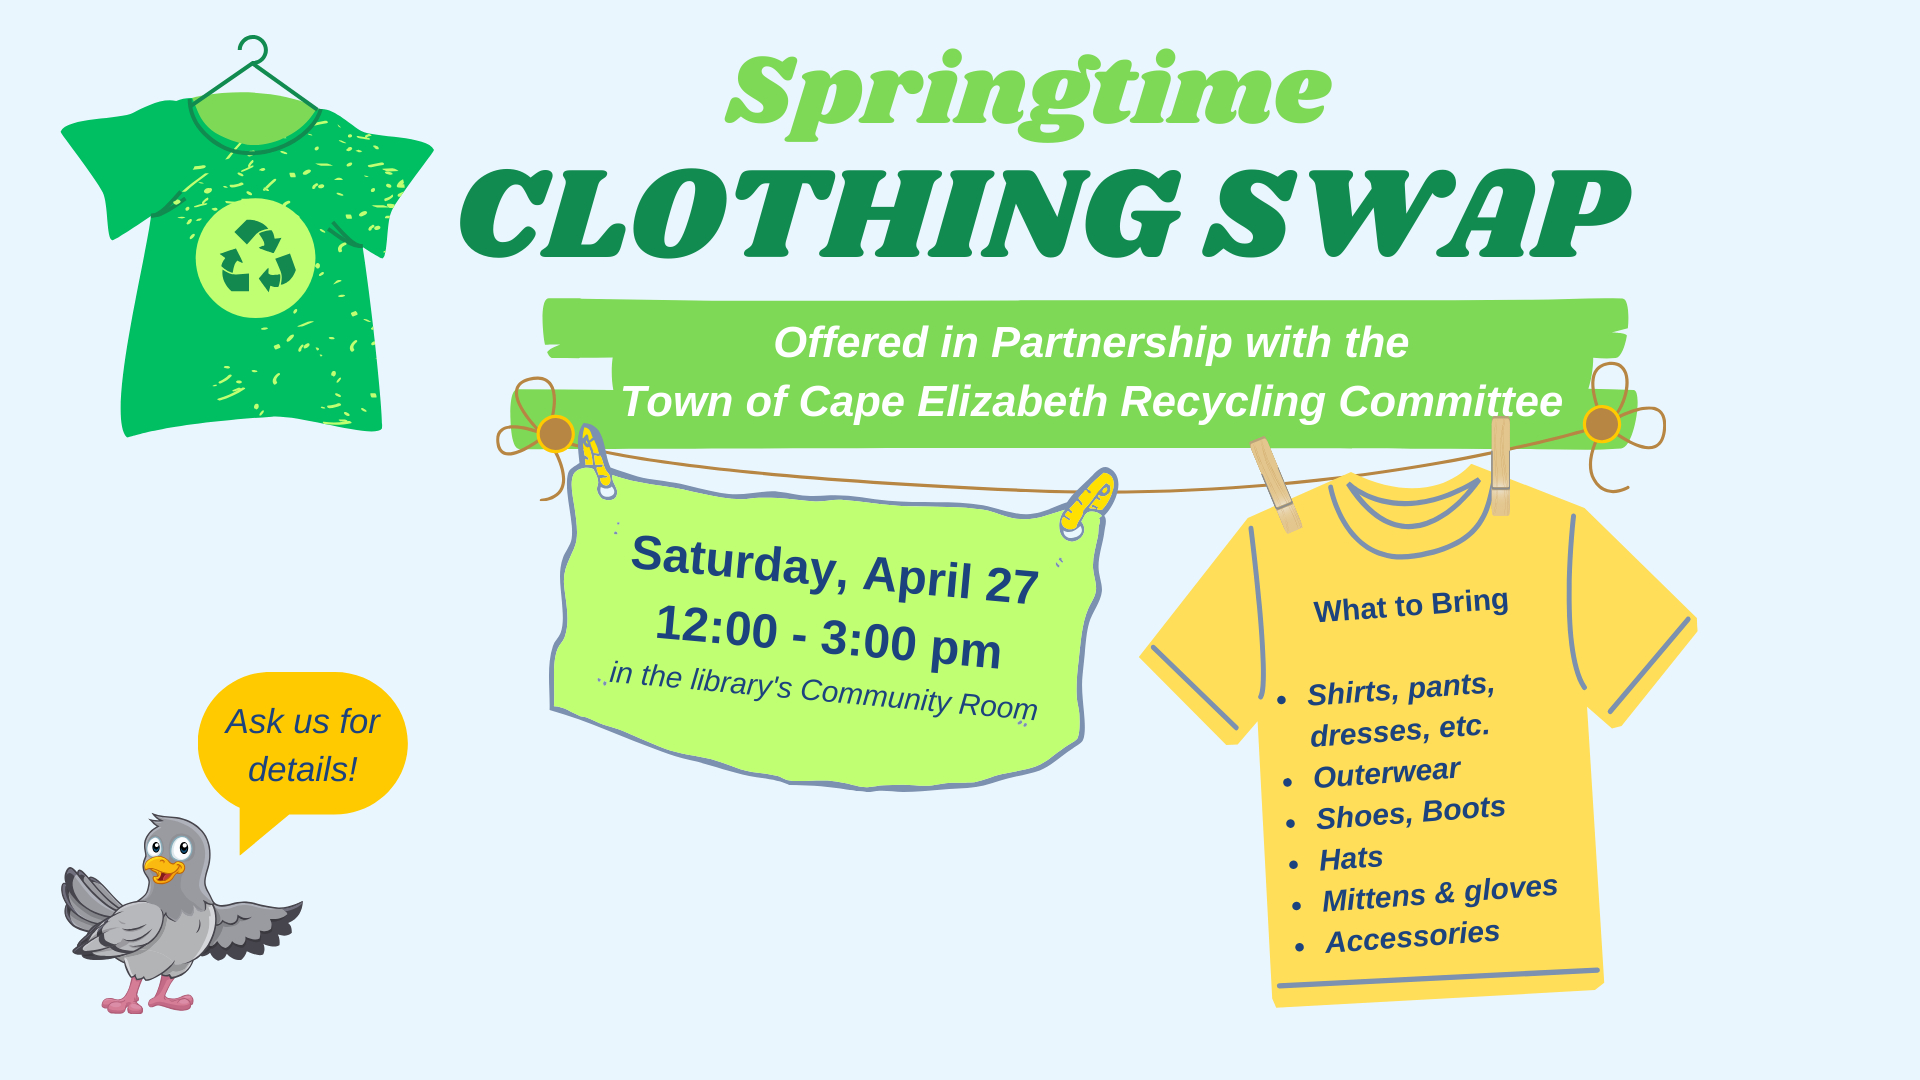 Springtime Clothing Swap, Saturday April 27. Image of a shirt with a recycling logo, and a clothesline with relevant information. Click the image for details.